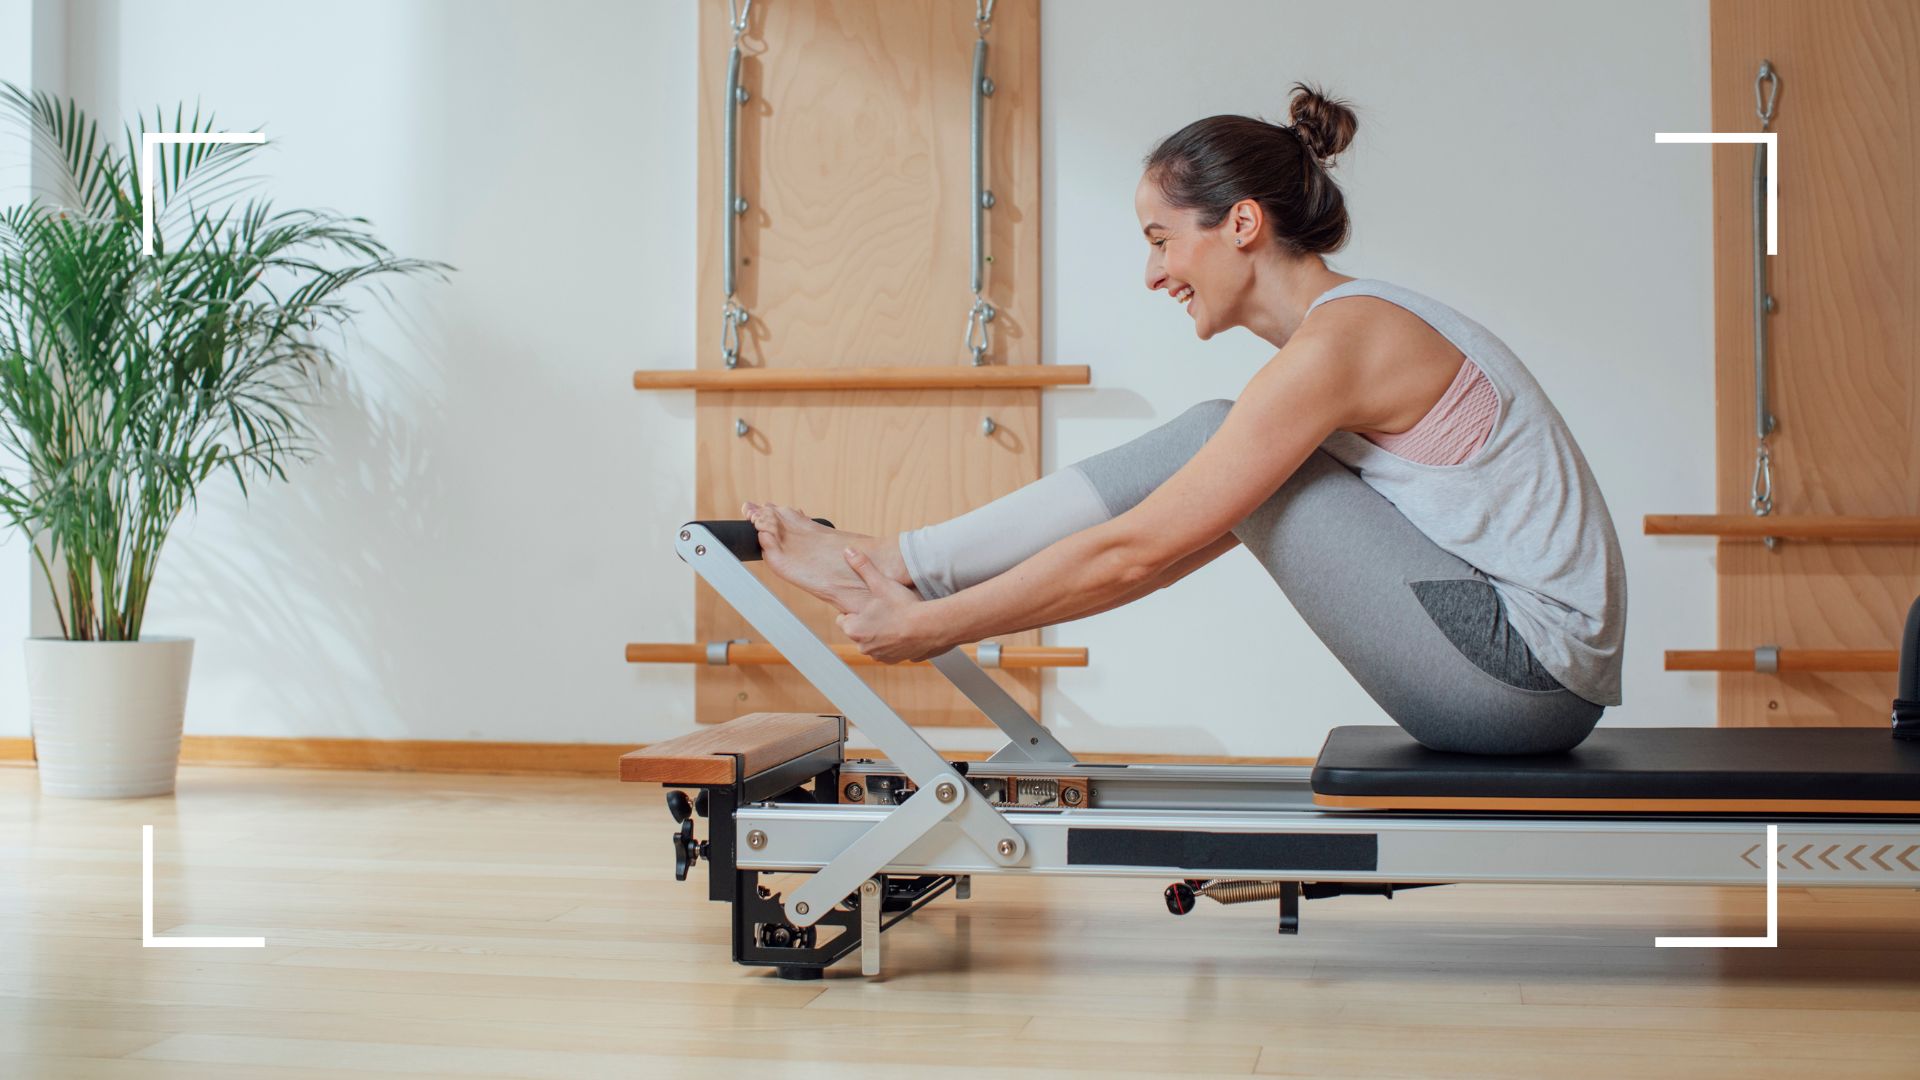 What is reformer Pilates - and can you do it at home?